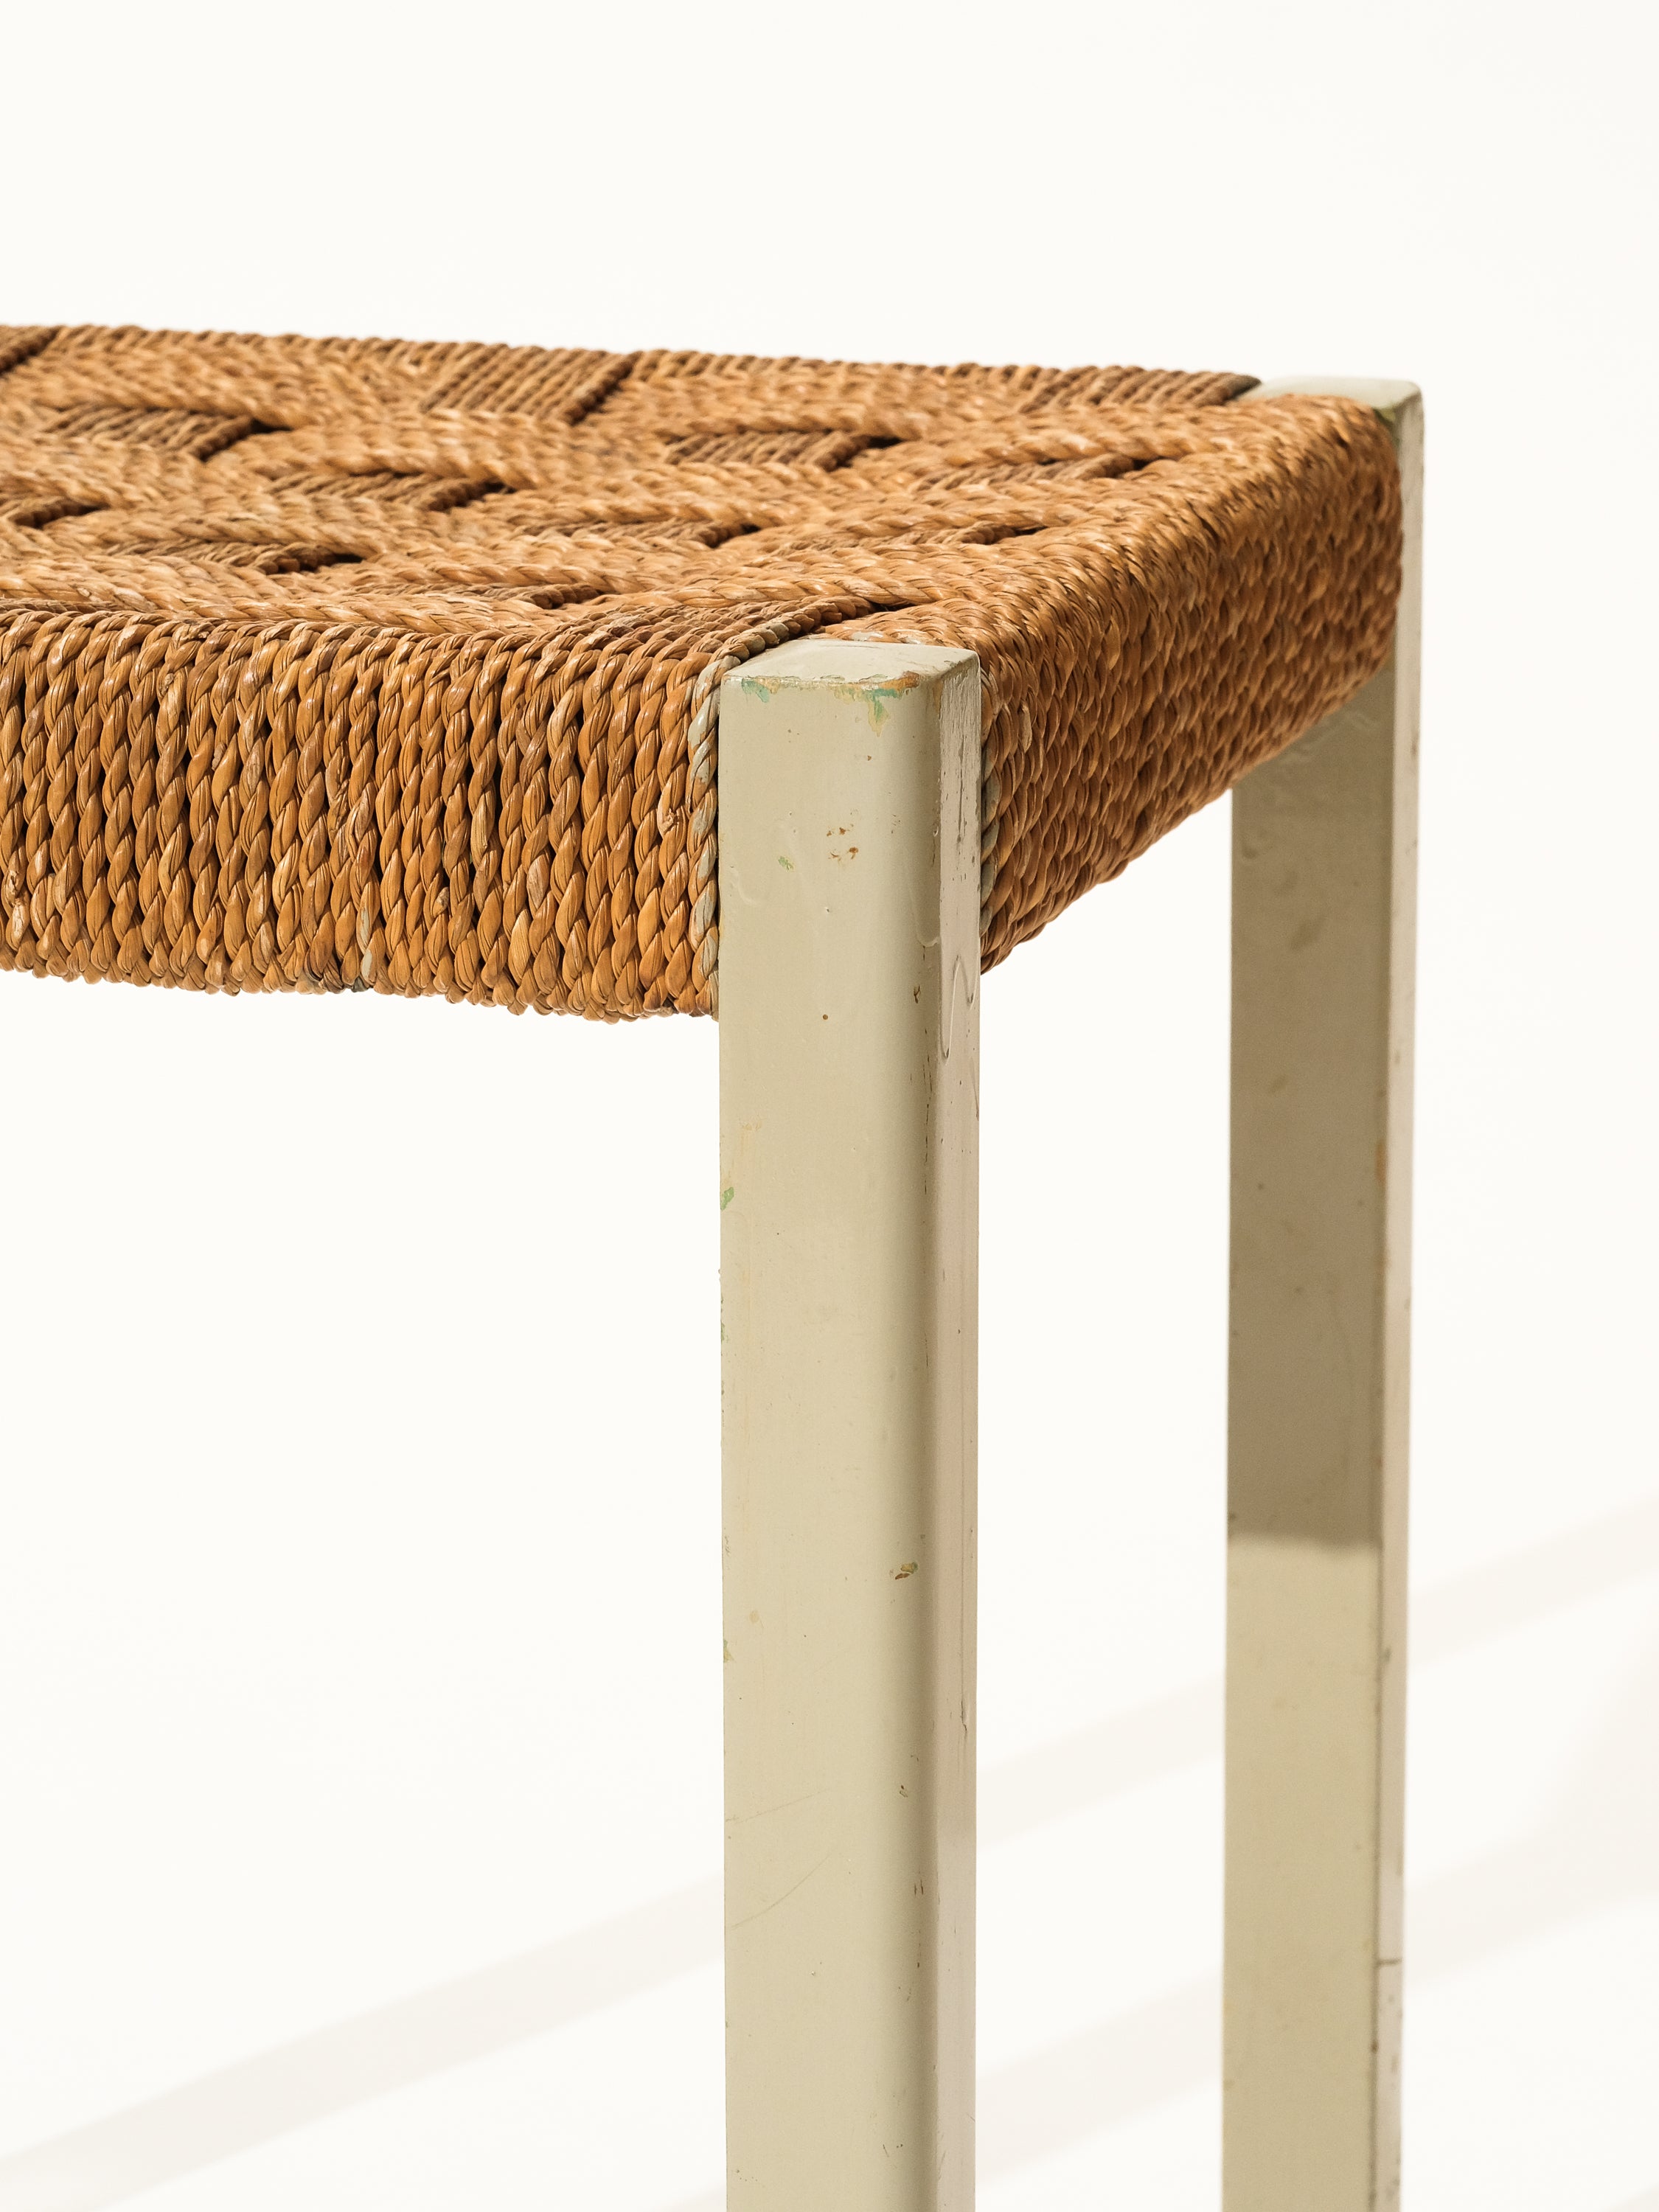 Woven Seagrass and Painted Wood Stool by Axel Larsson for Gemla, Sweden, 1940s